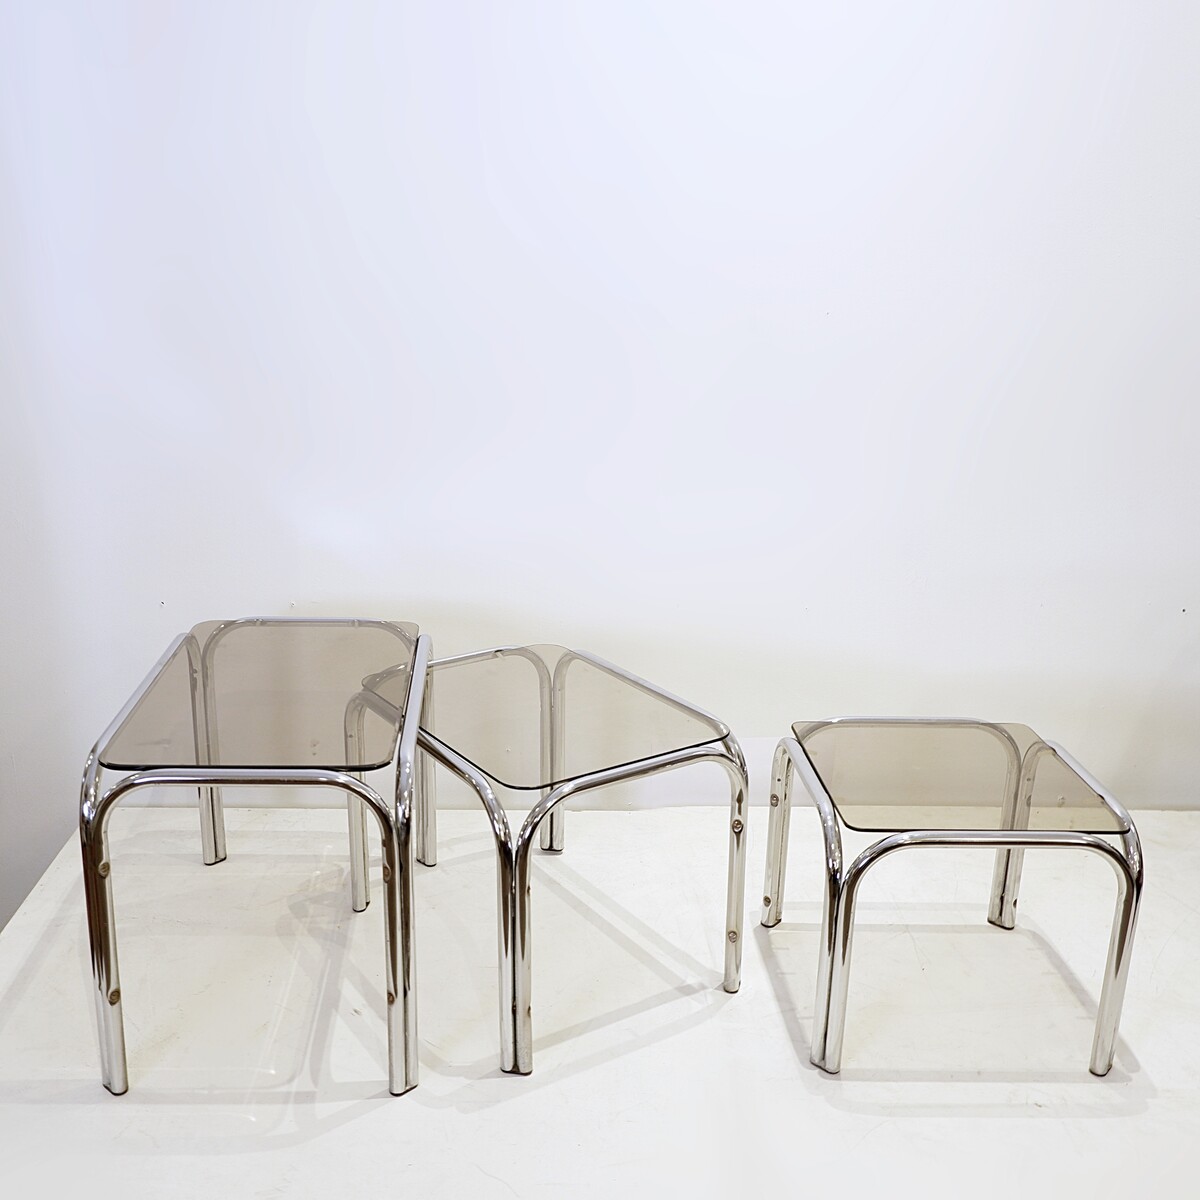 Vintage Nesting Tables in Chrome and Smoked Glass - 1970s